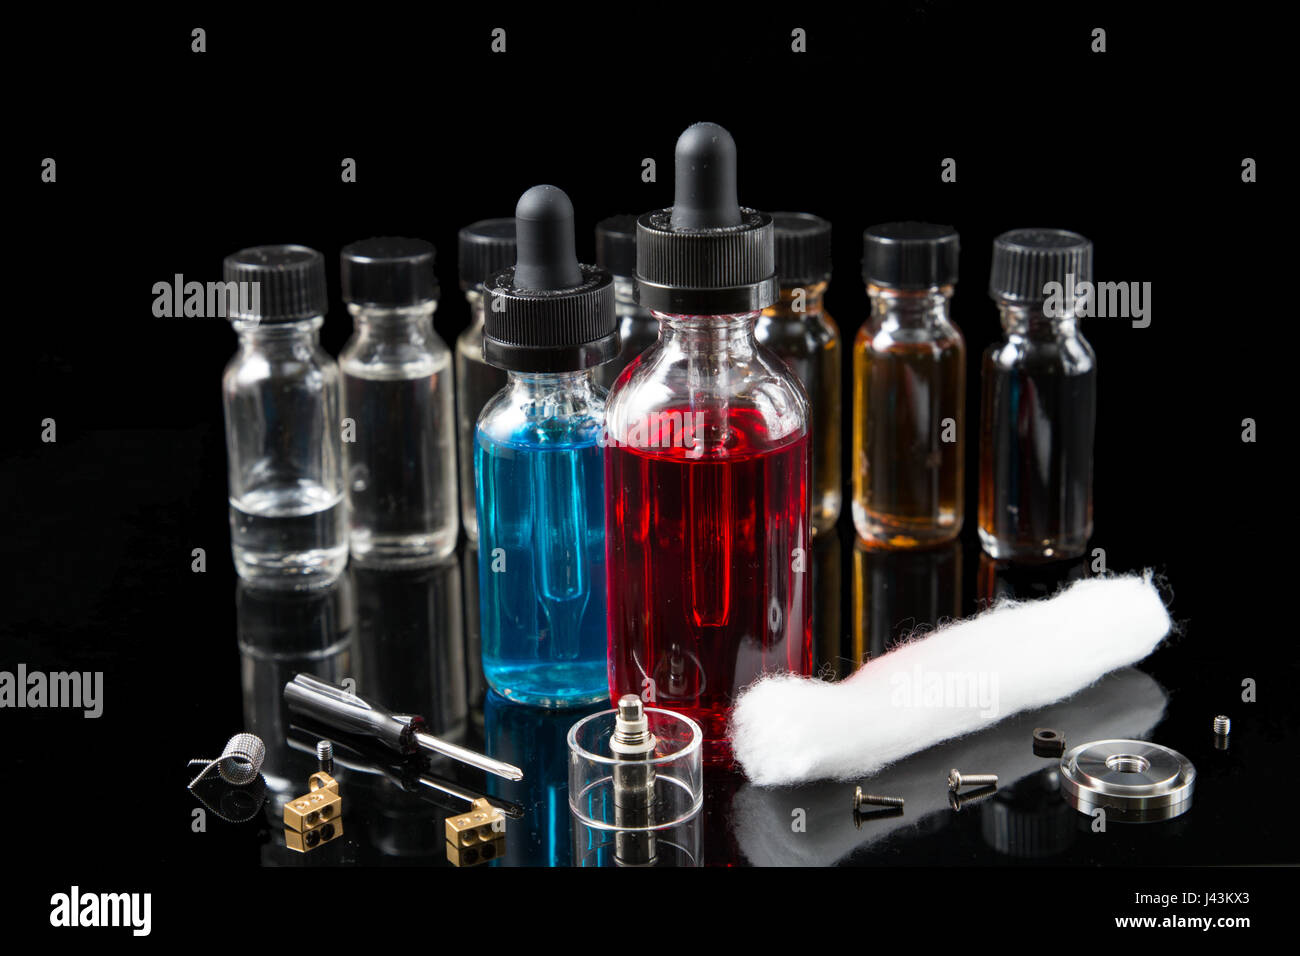 Vaporizer smoke with juice bottles, screwdriver and cotton wick with tools Stock Photo